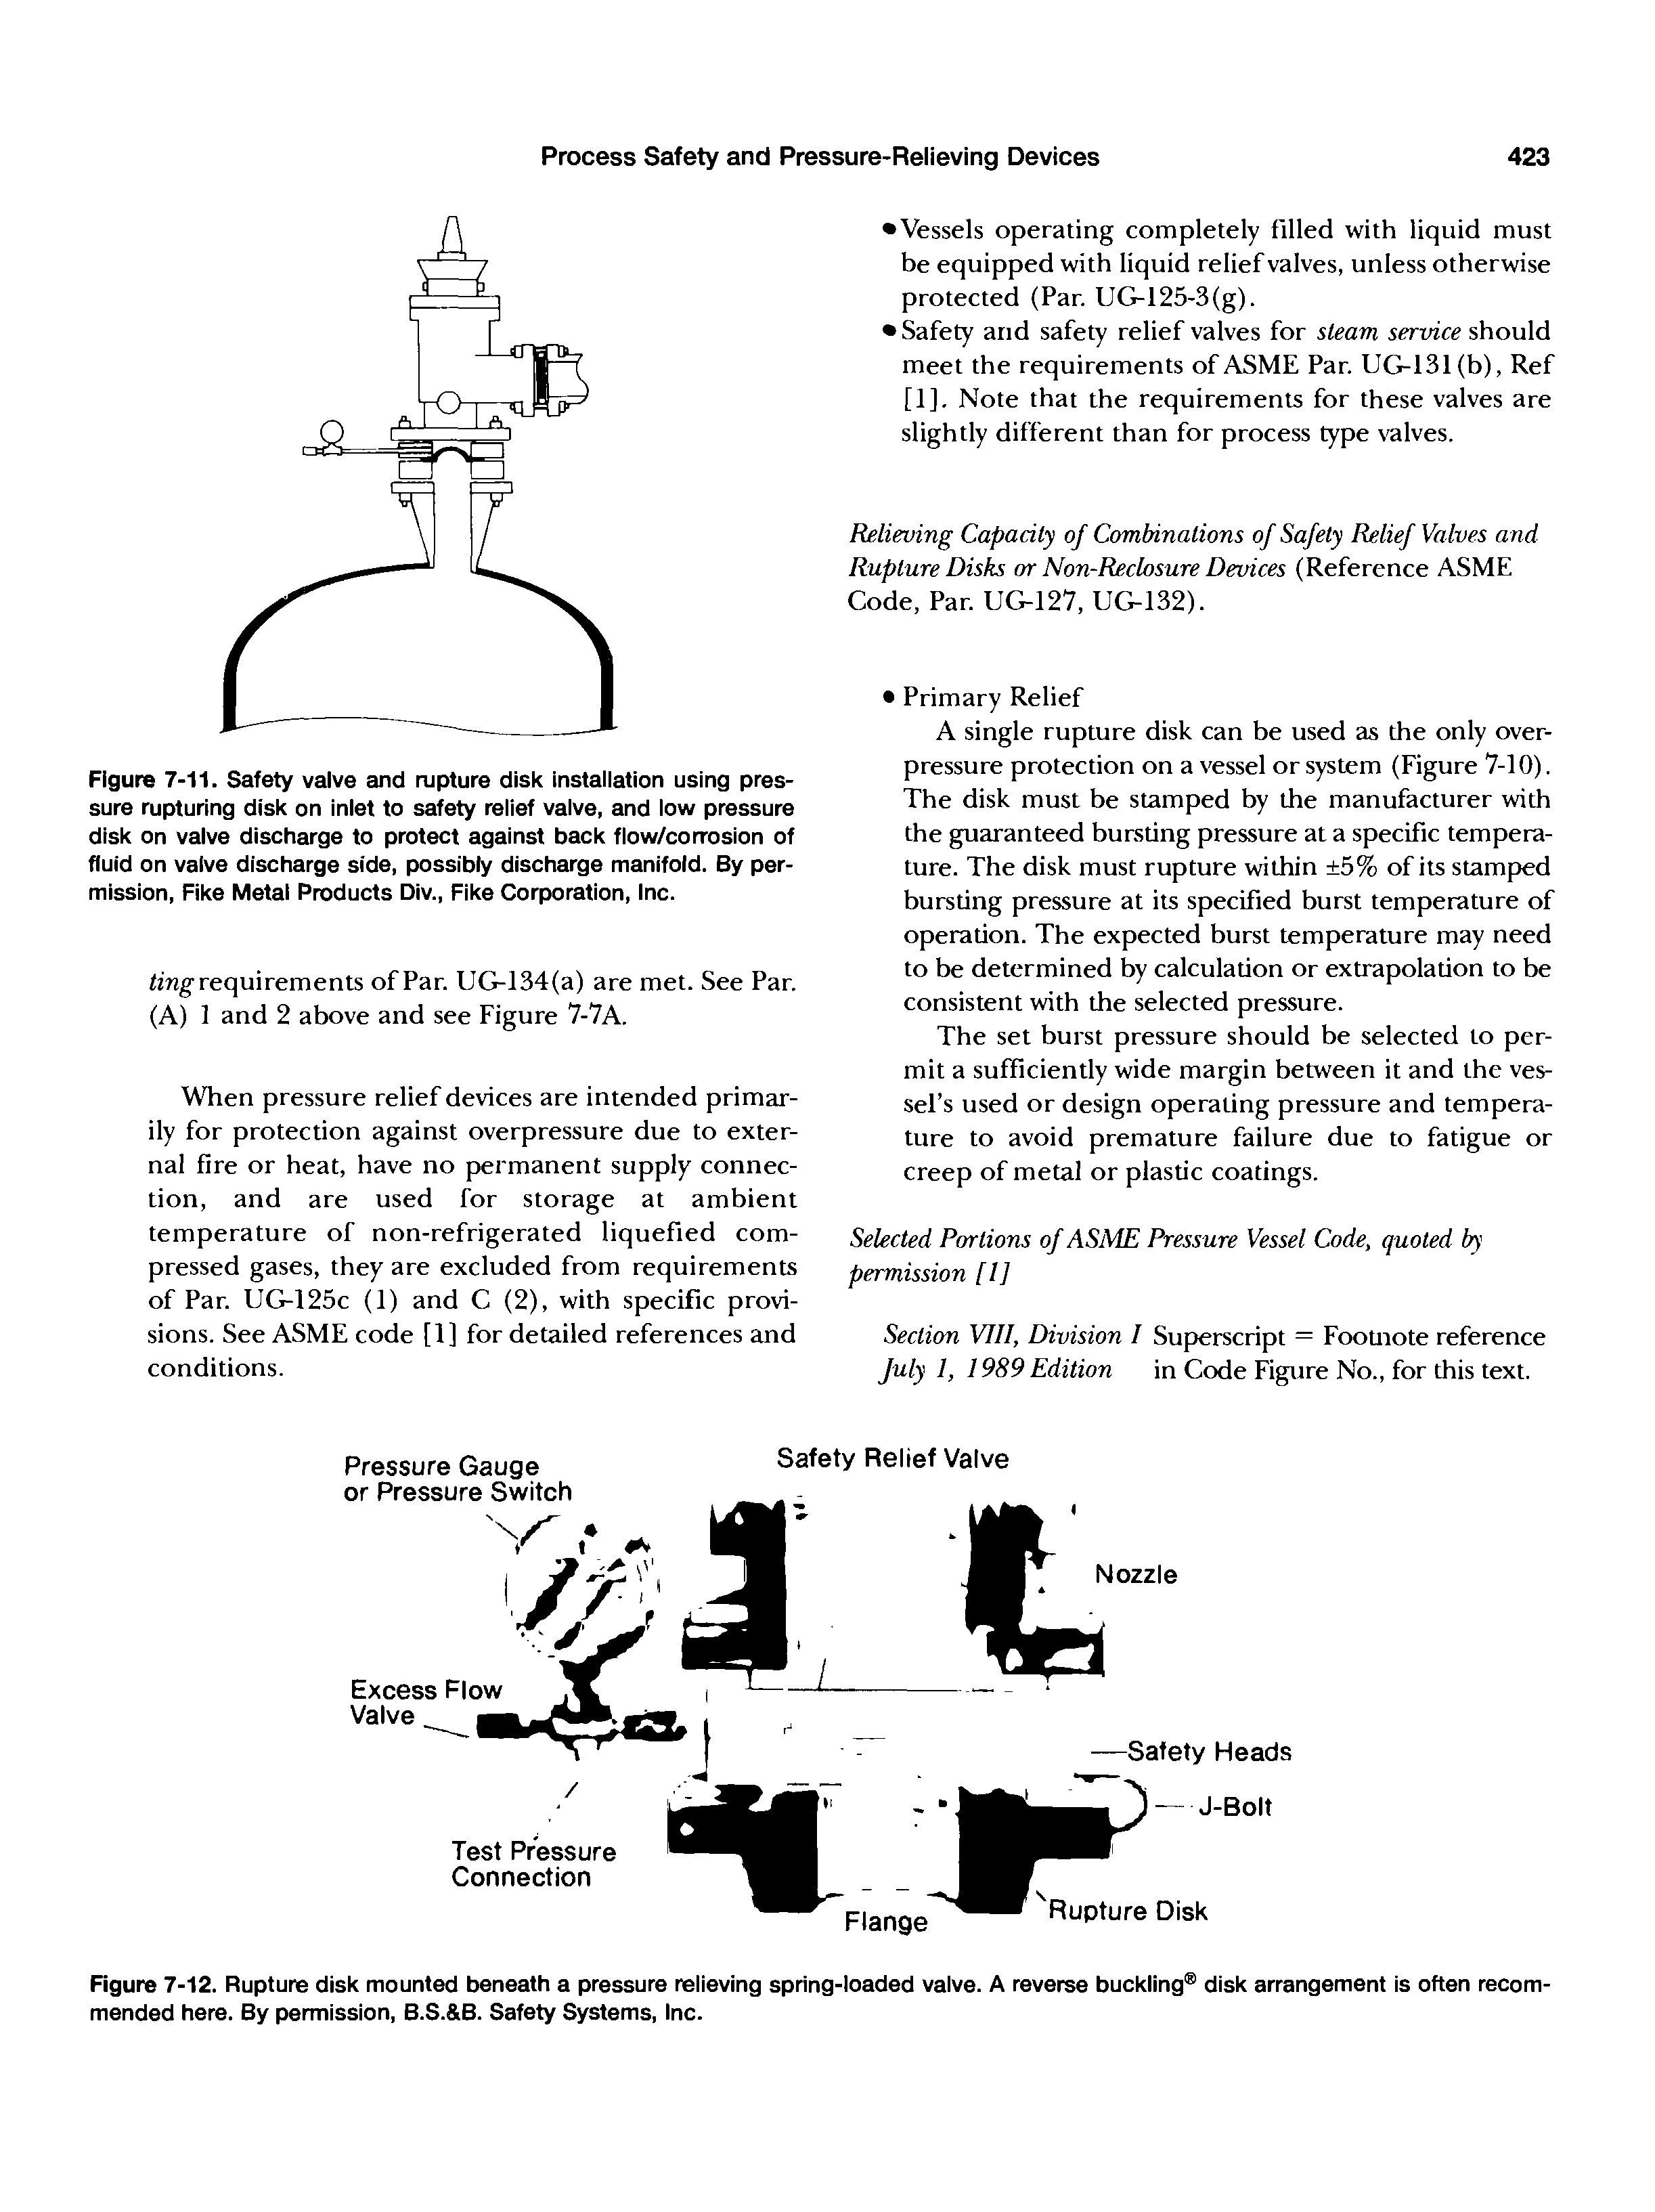 Figure 7-11. Safety valve and rupture disk installation using pressure rupturing disk on inlet to safety relief valve, and low pressure disk on valve discharge to protect against back flow/con-osion of fluid on valve discharge side, possibly discharge manifold. By permission, Fike Metal Products Div., Fike Corporation, Inc.